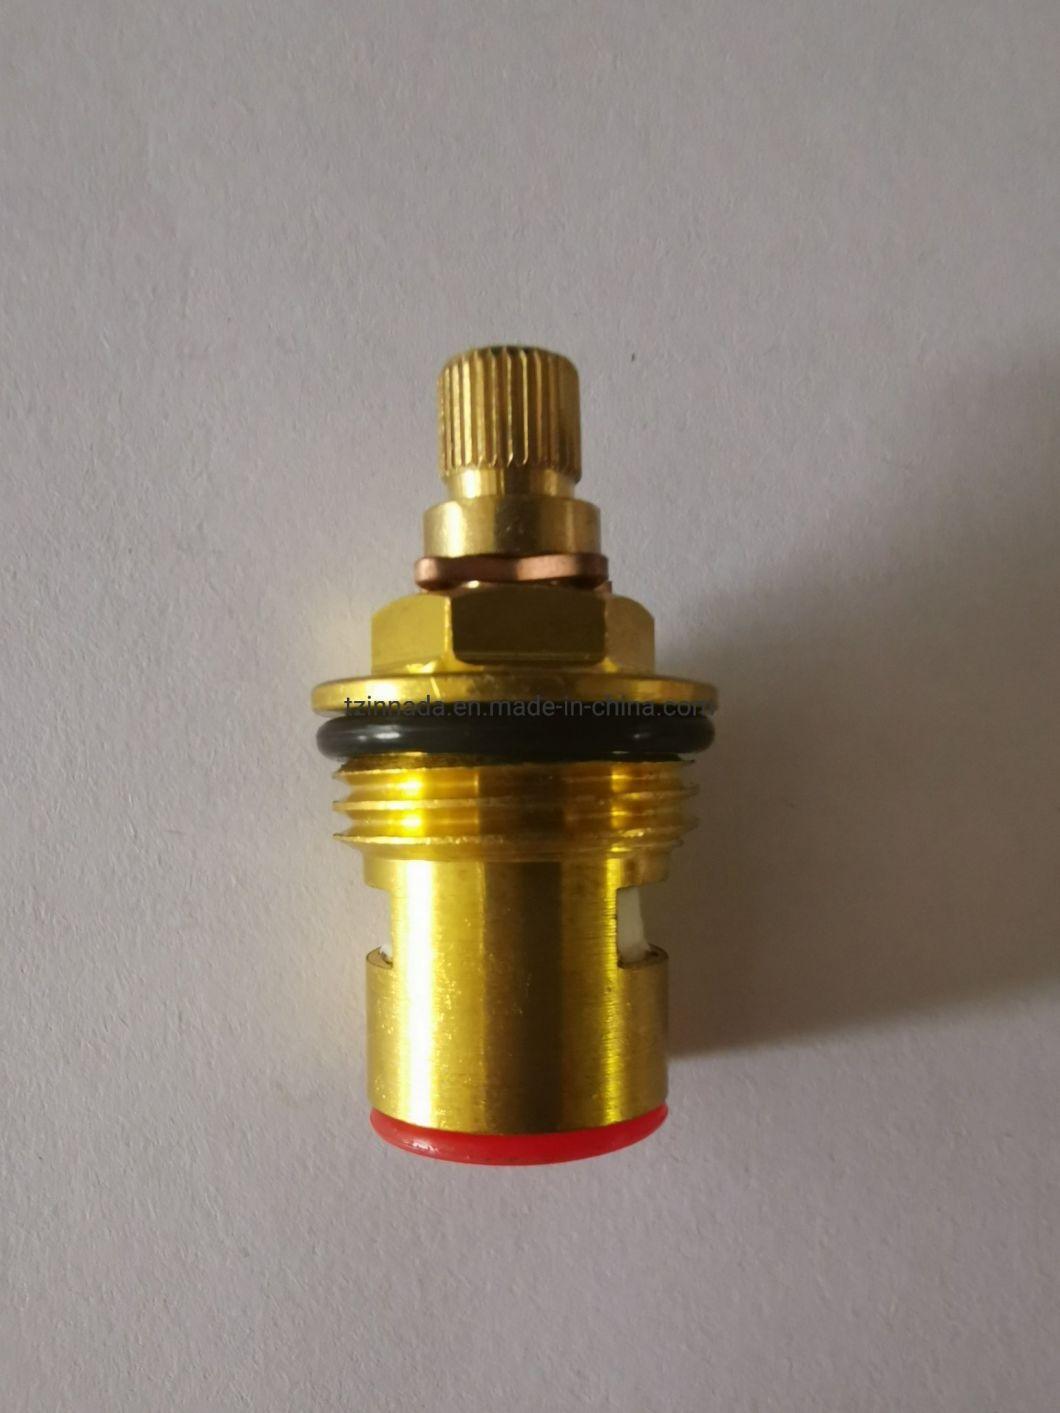 Brass Valve Bathroom Faucet Cartridge for Valve Parts and Faucet